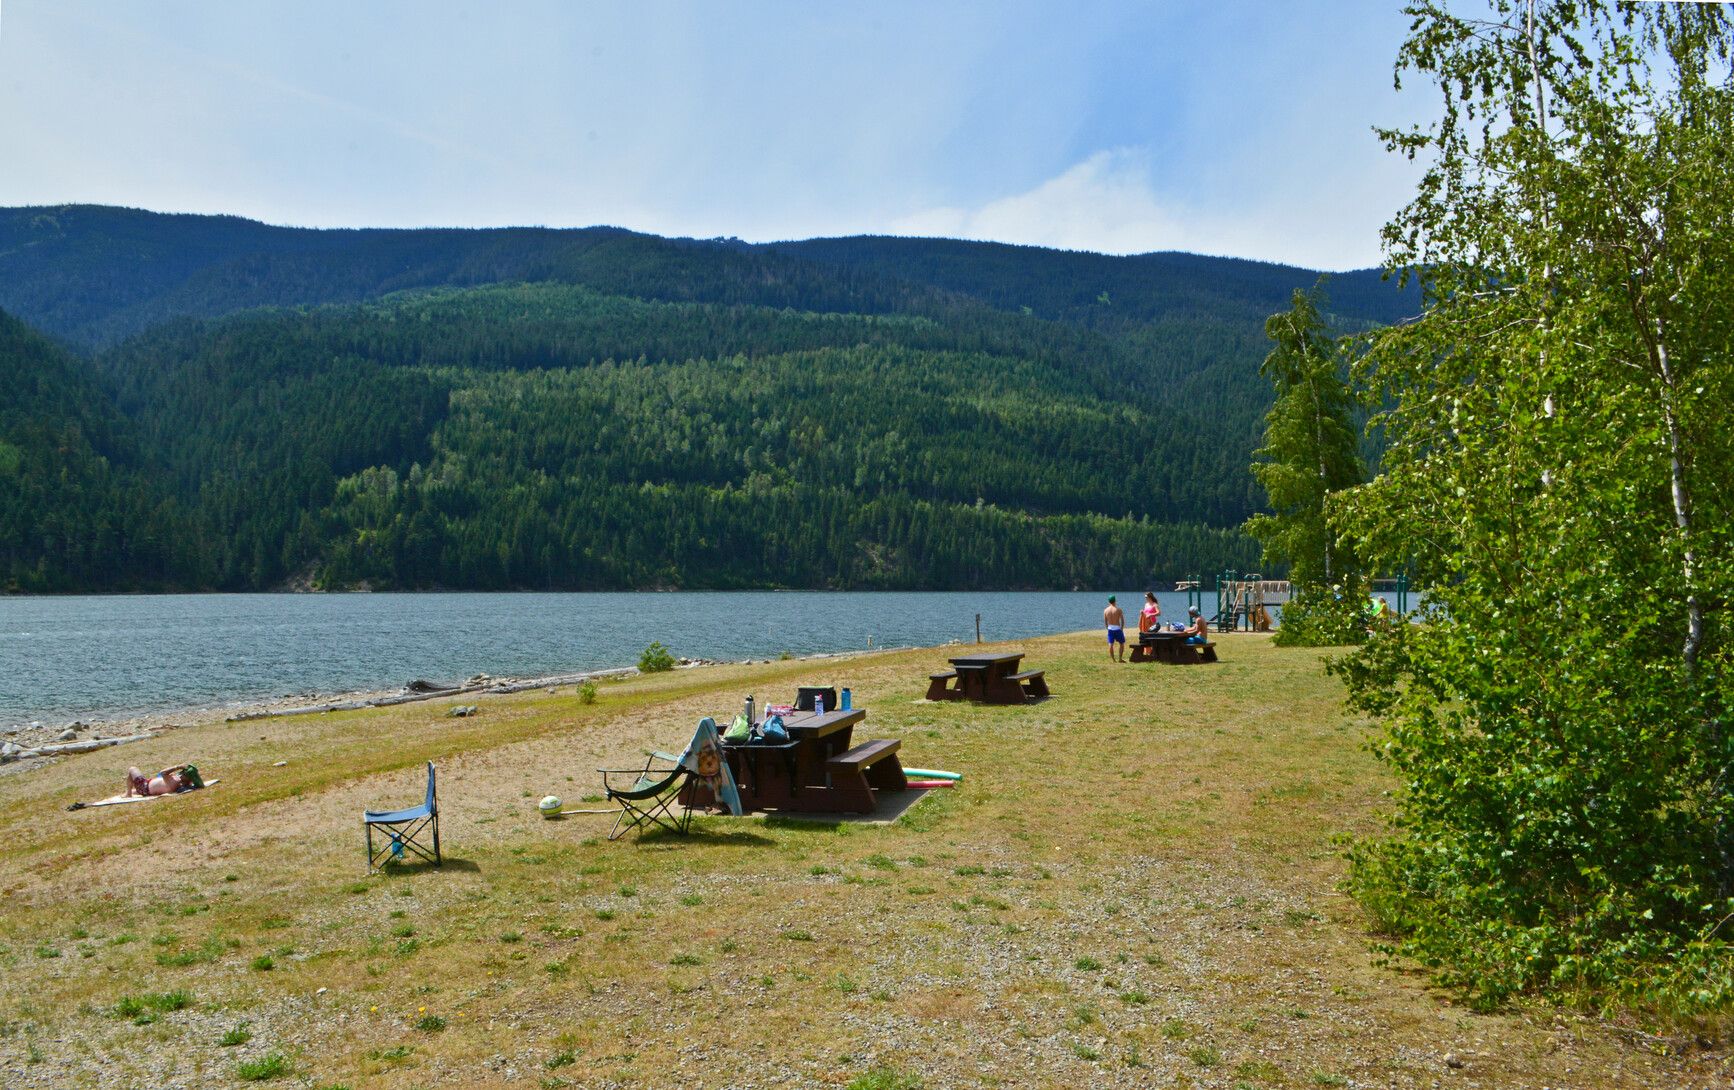 Park visitors relaxing at a day-use site by Lake Revelstoke in Martha Creek Park.